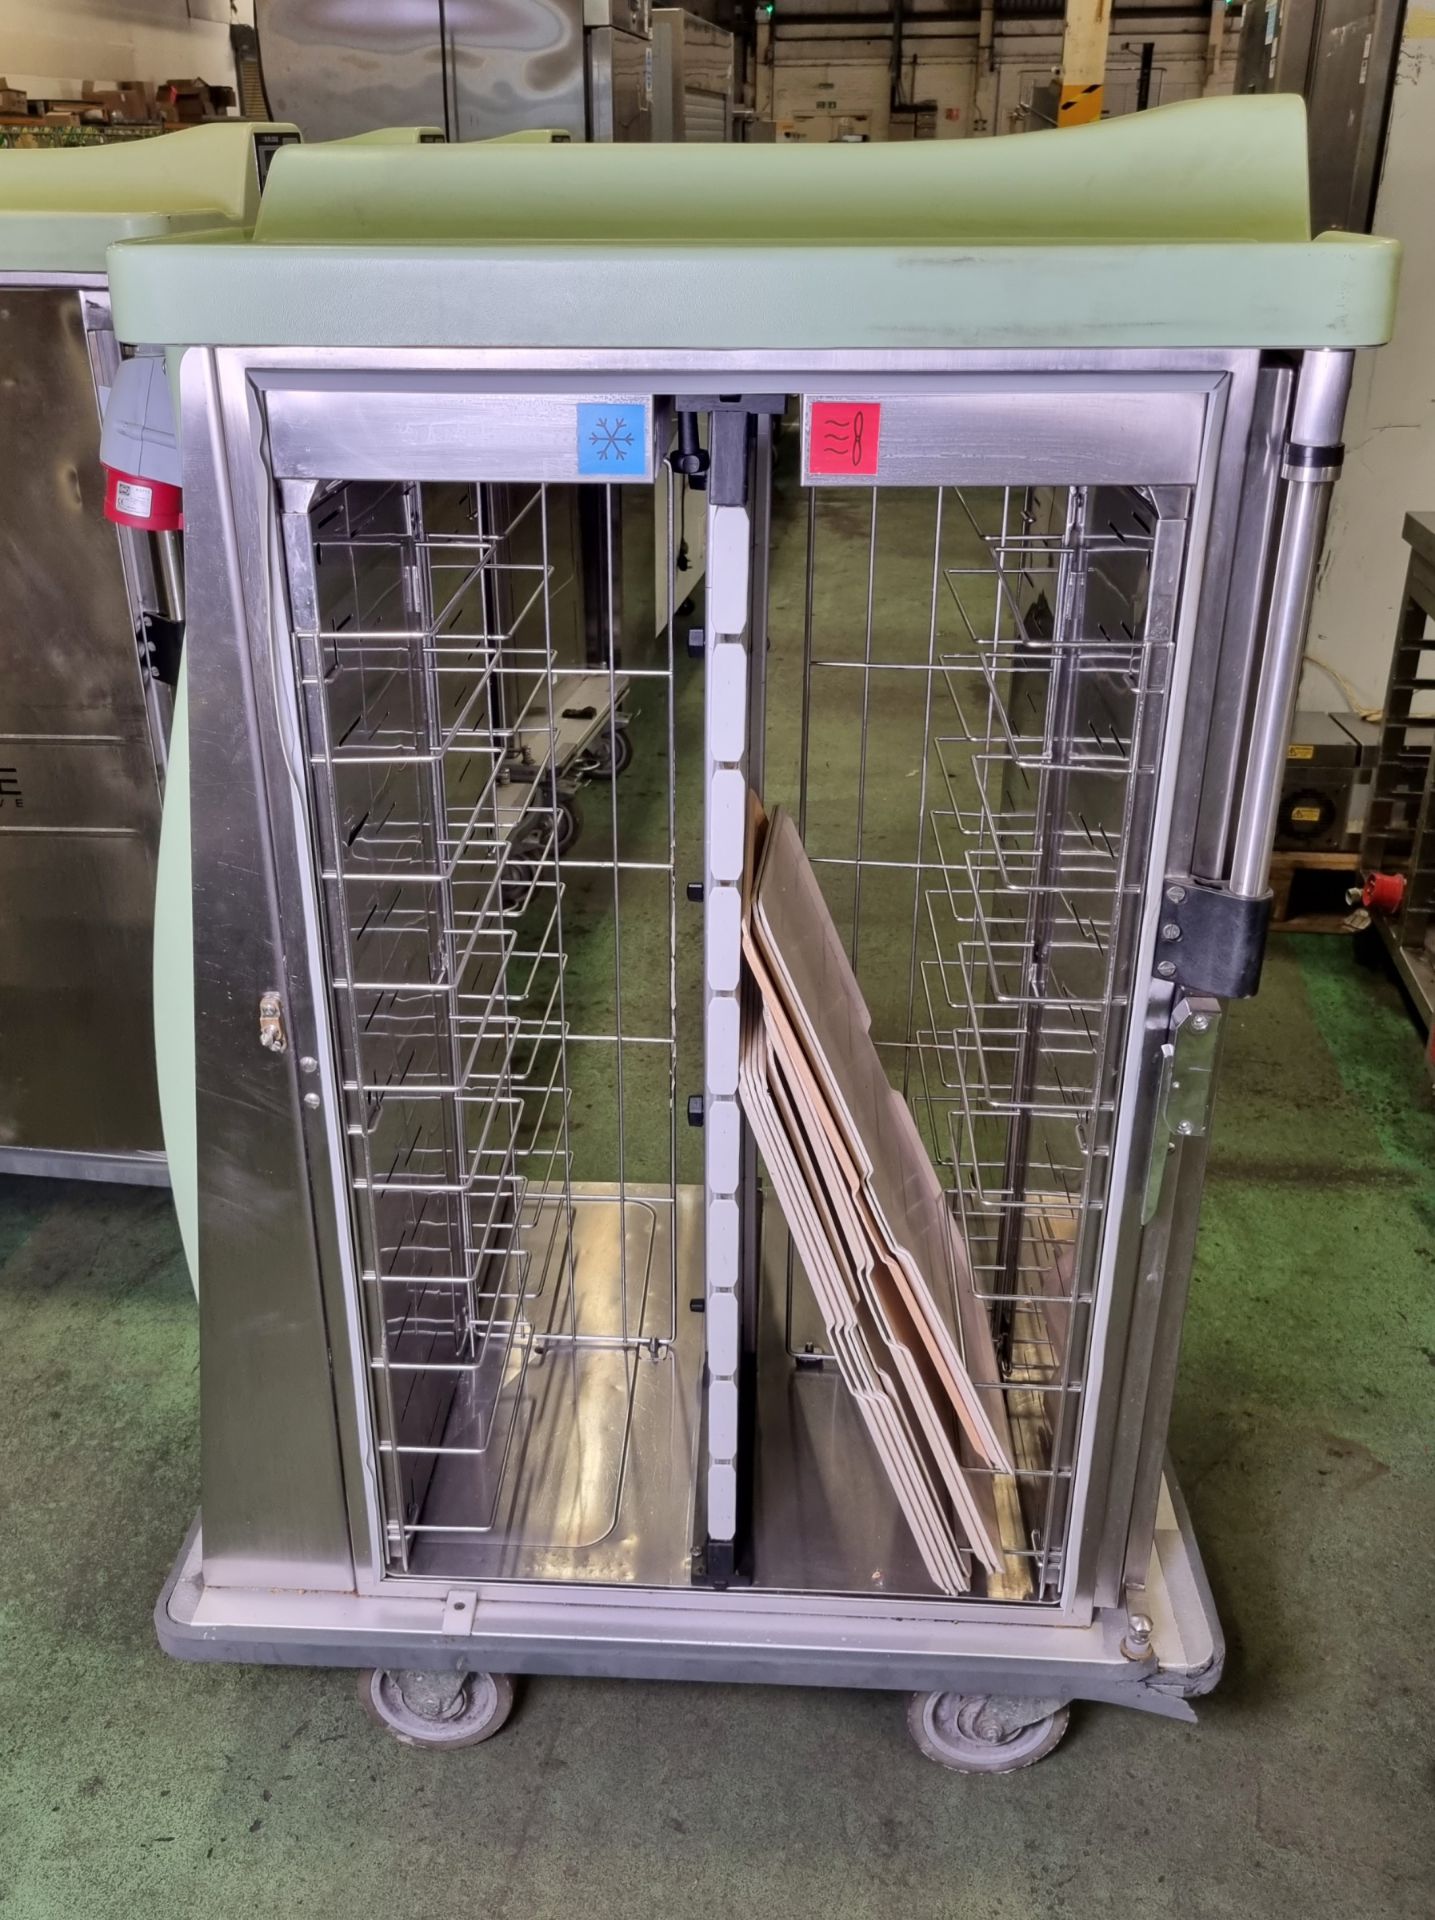 Burlodge RTS hot and cold tray delivery trolley - opens boths sides - W 800 x D 1100 x H 1500mm - Image 2 of 7